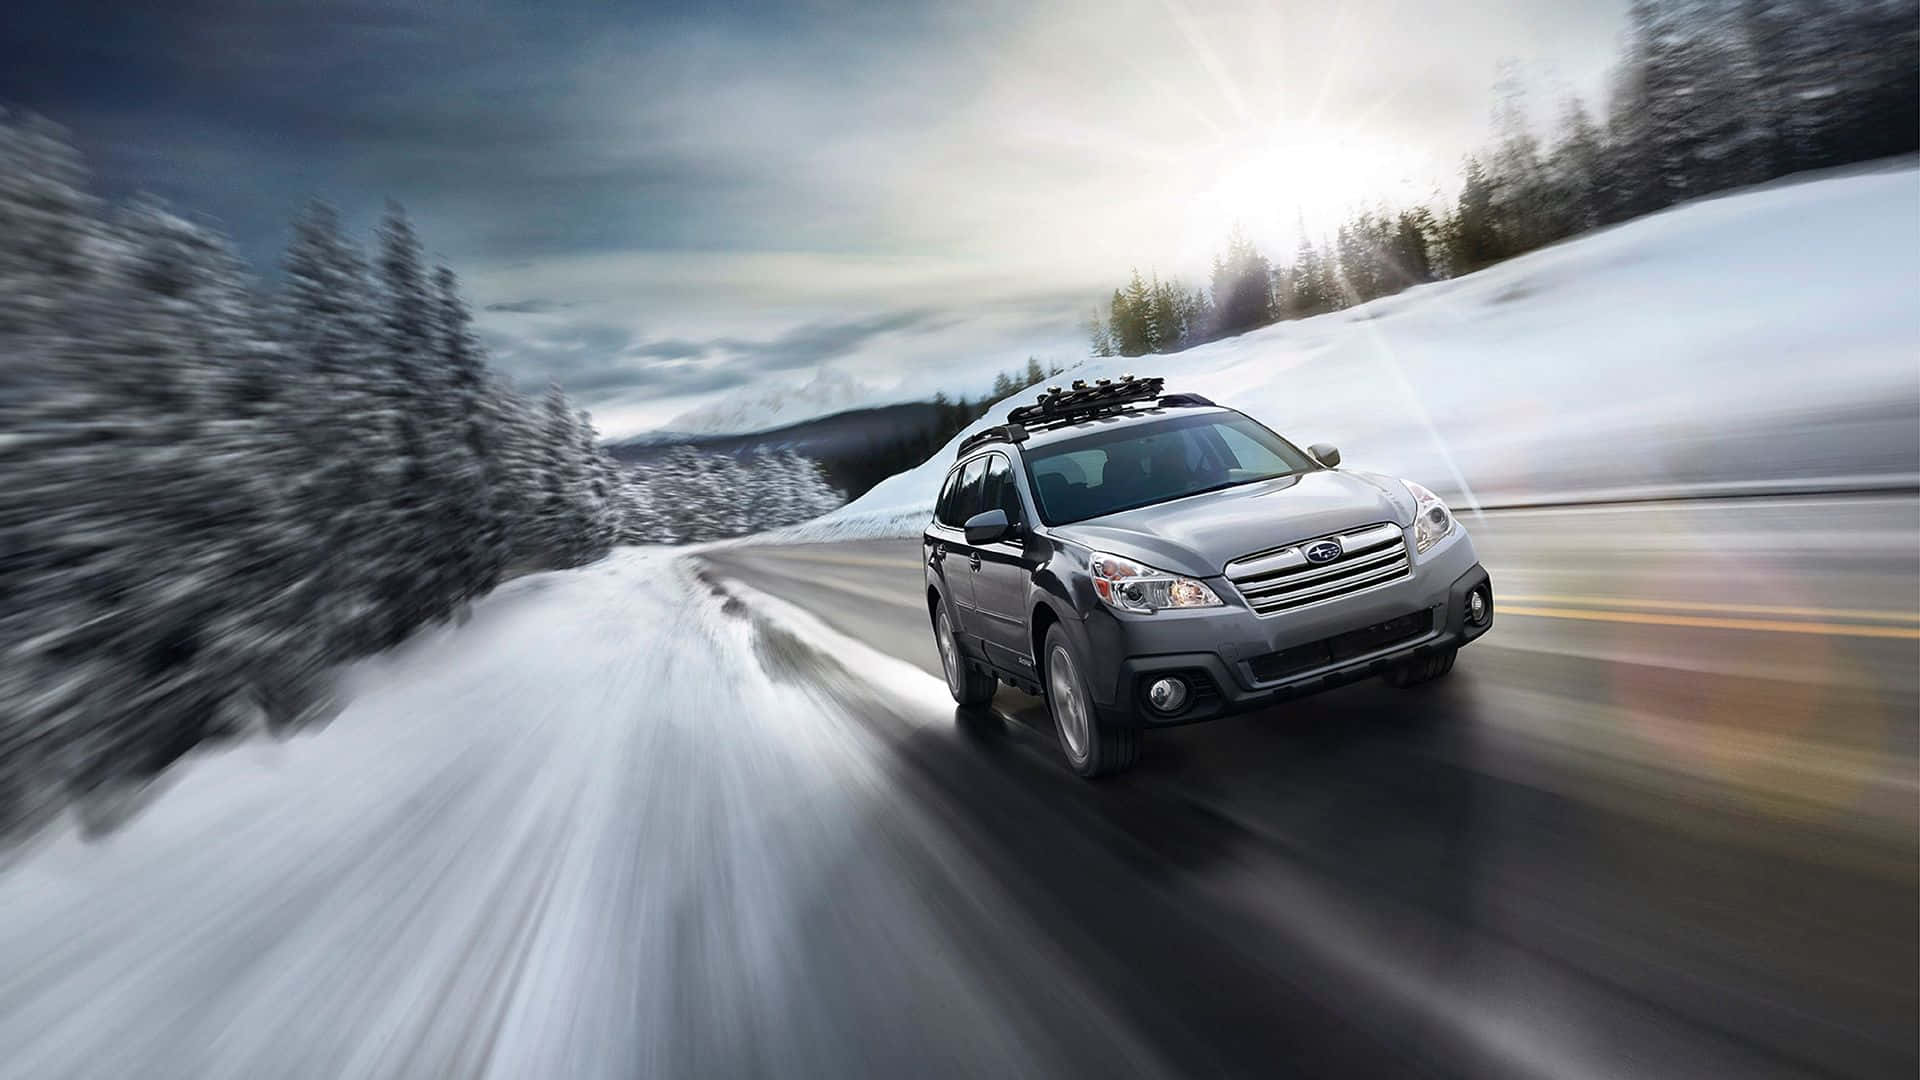 A Silver Subaru Outback Parked In The Wild Wallpaper